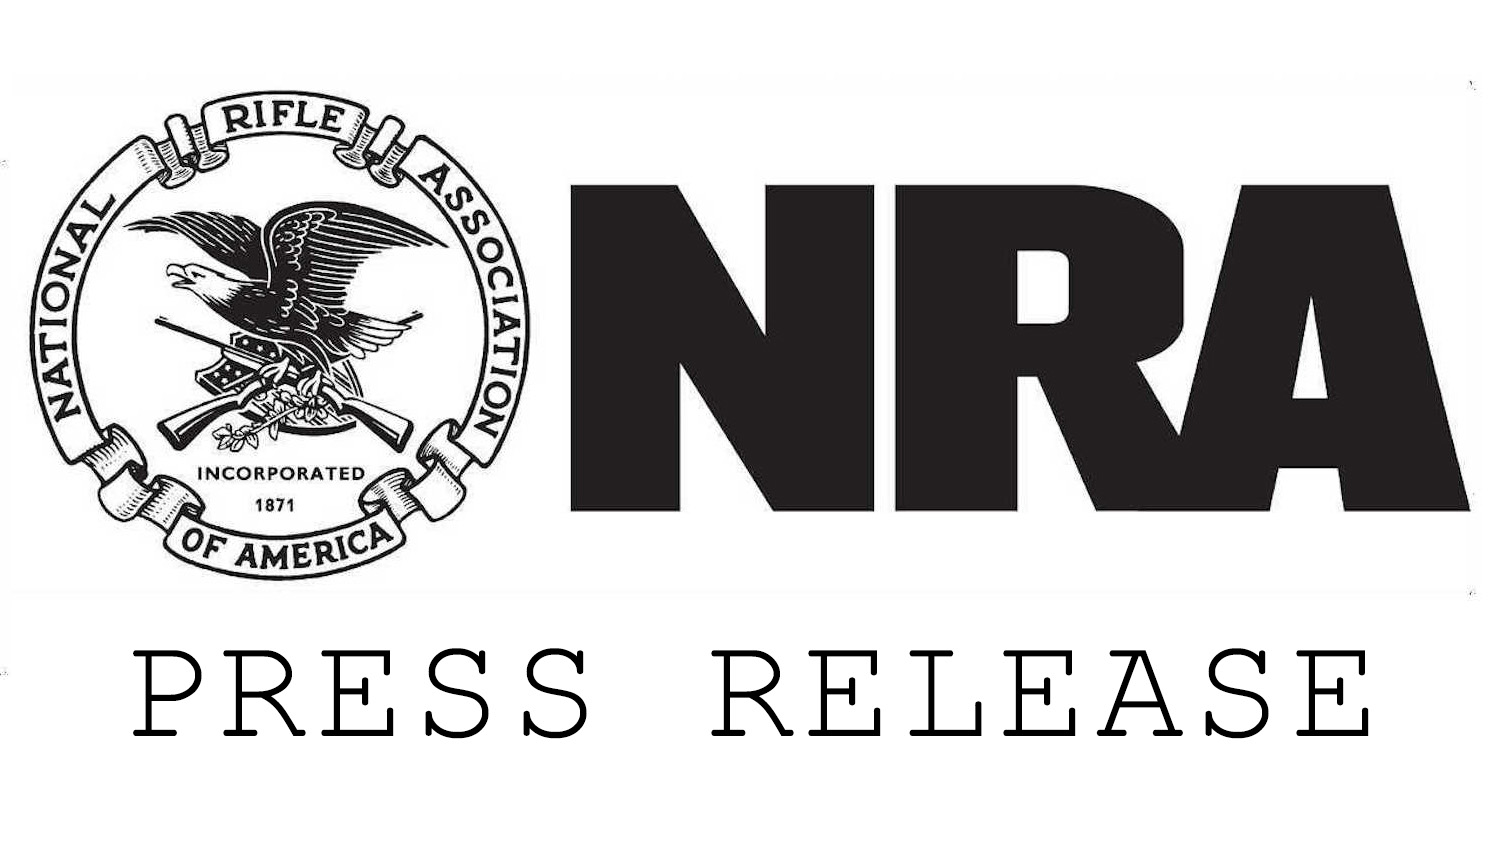 NRA School Shield Awards More Than $600,000 in Grants To Support School Security Projects Nationwide